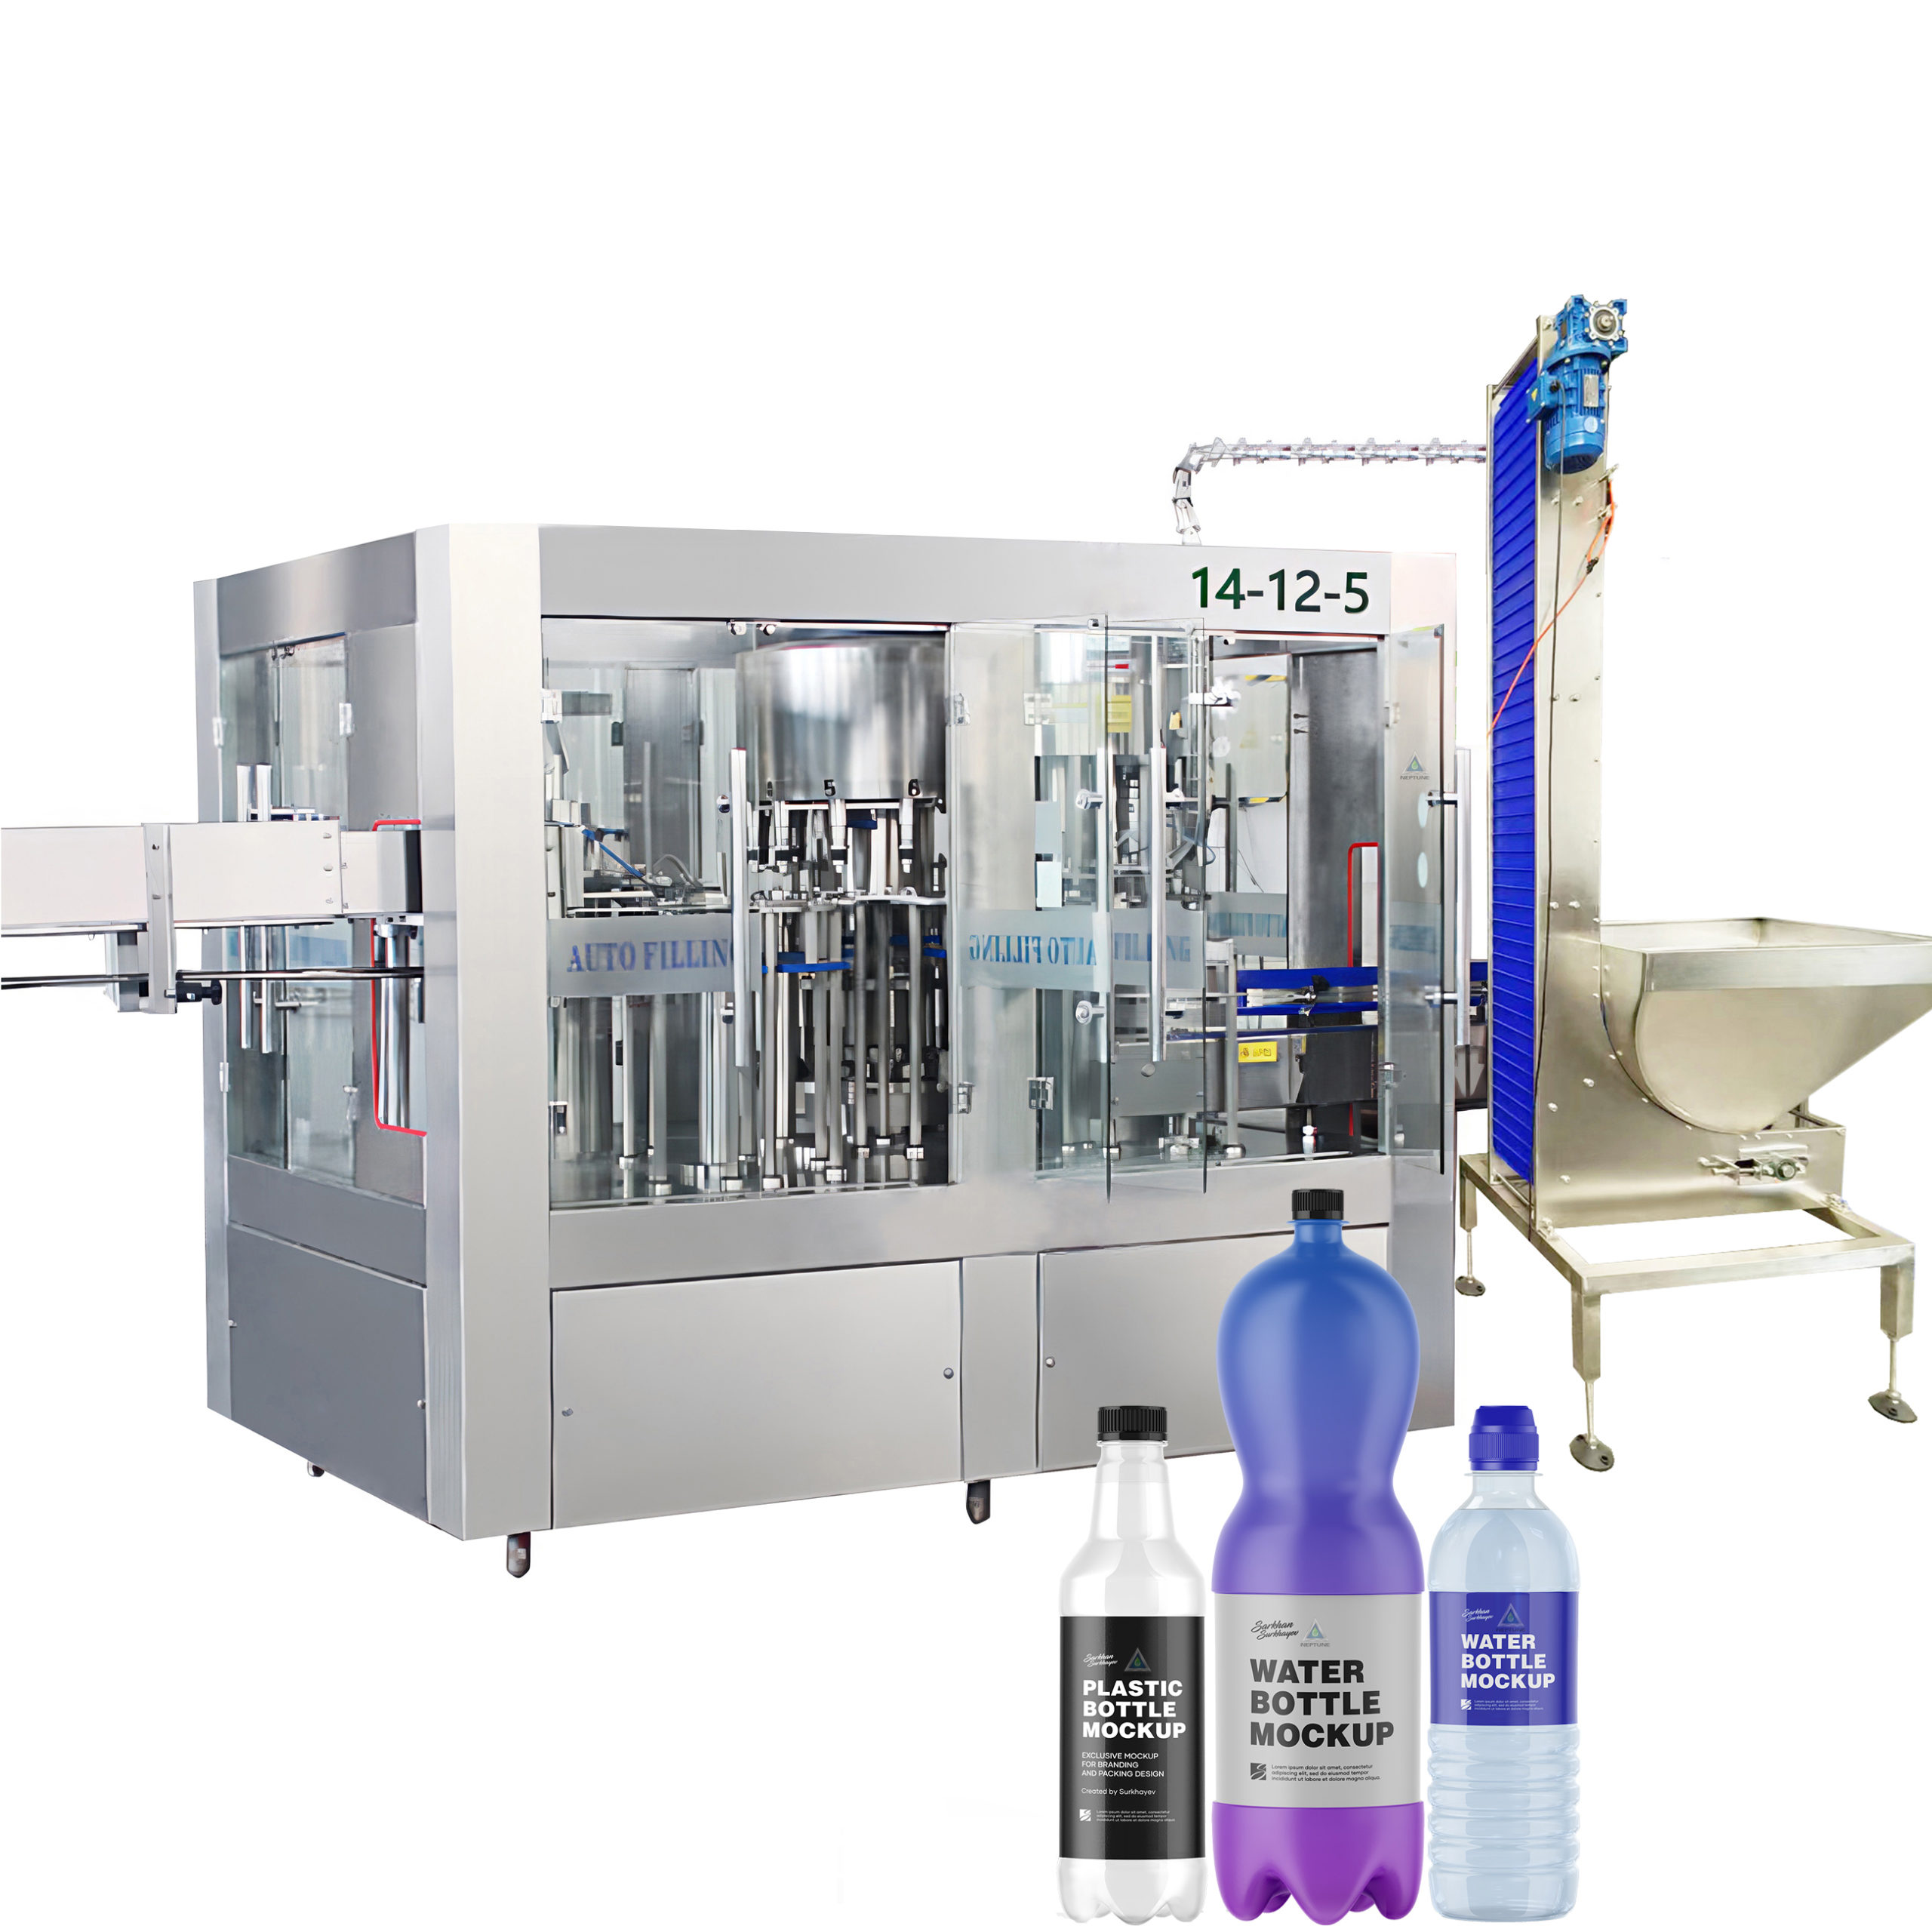 Advanced Mineral bottle Water Filling Machine collect rinser, filler and capper in one monoblock filling machine. All-in one monoblock filling machine for bottling water range from 200ml to 2000ml. 